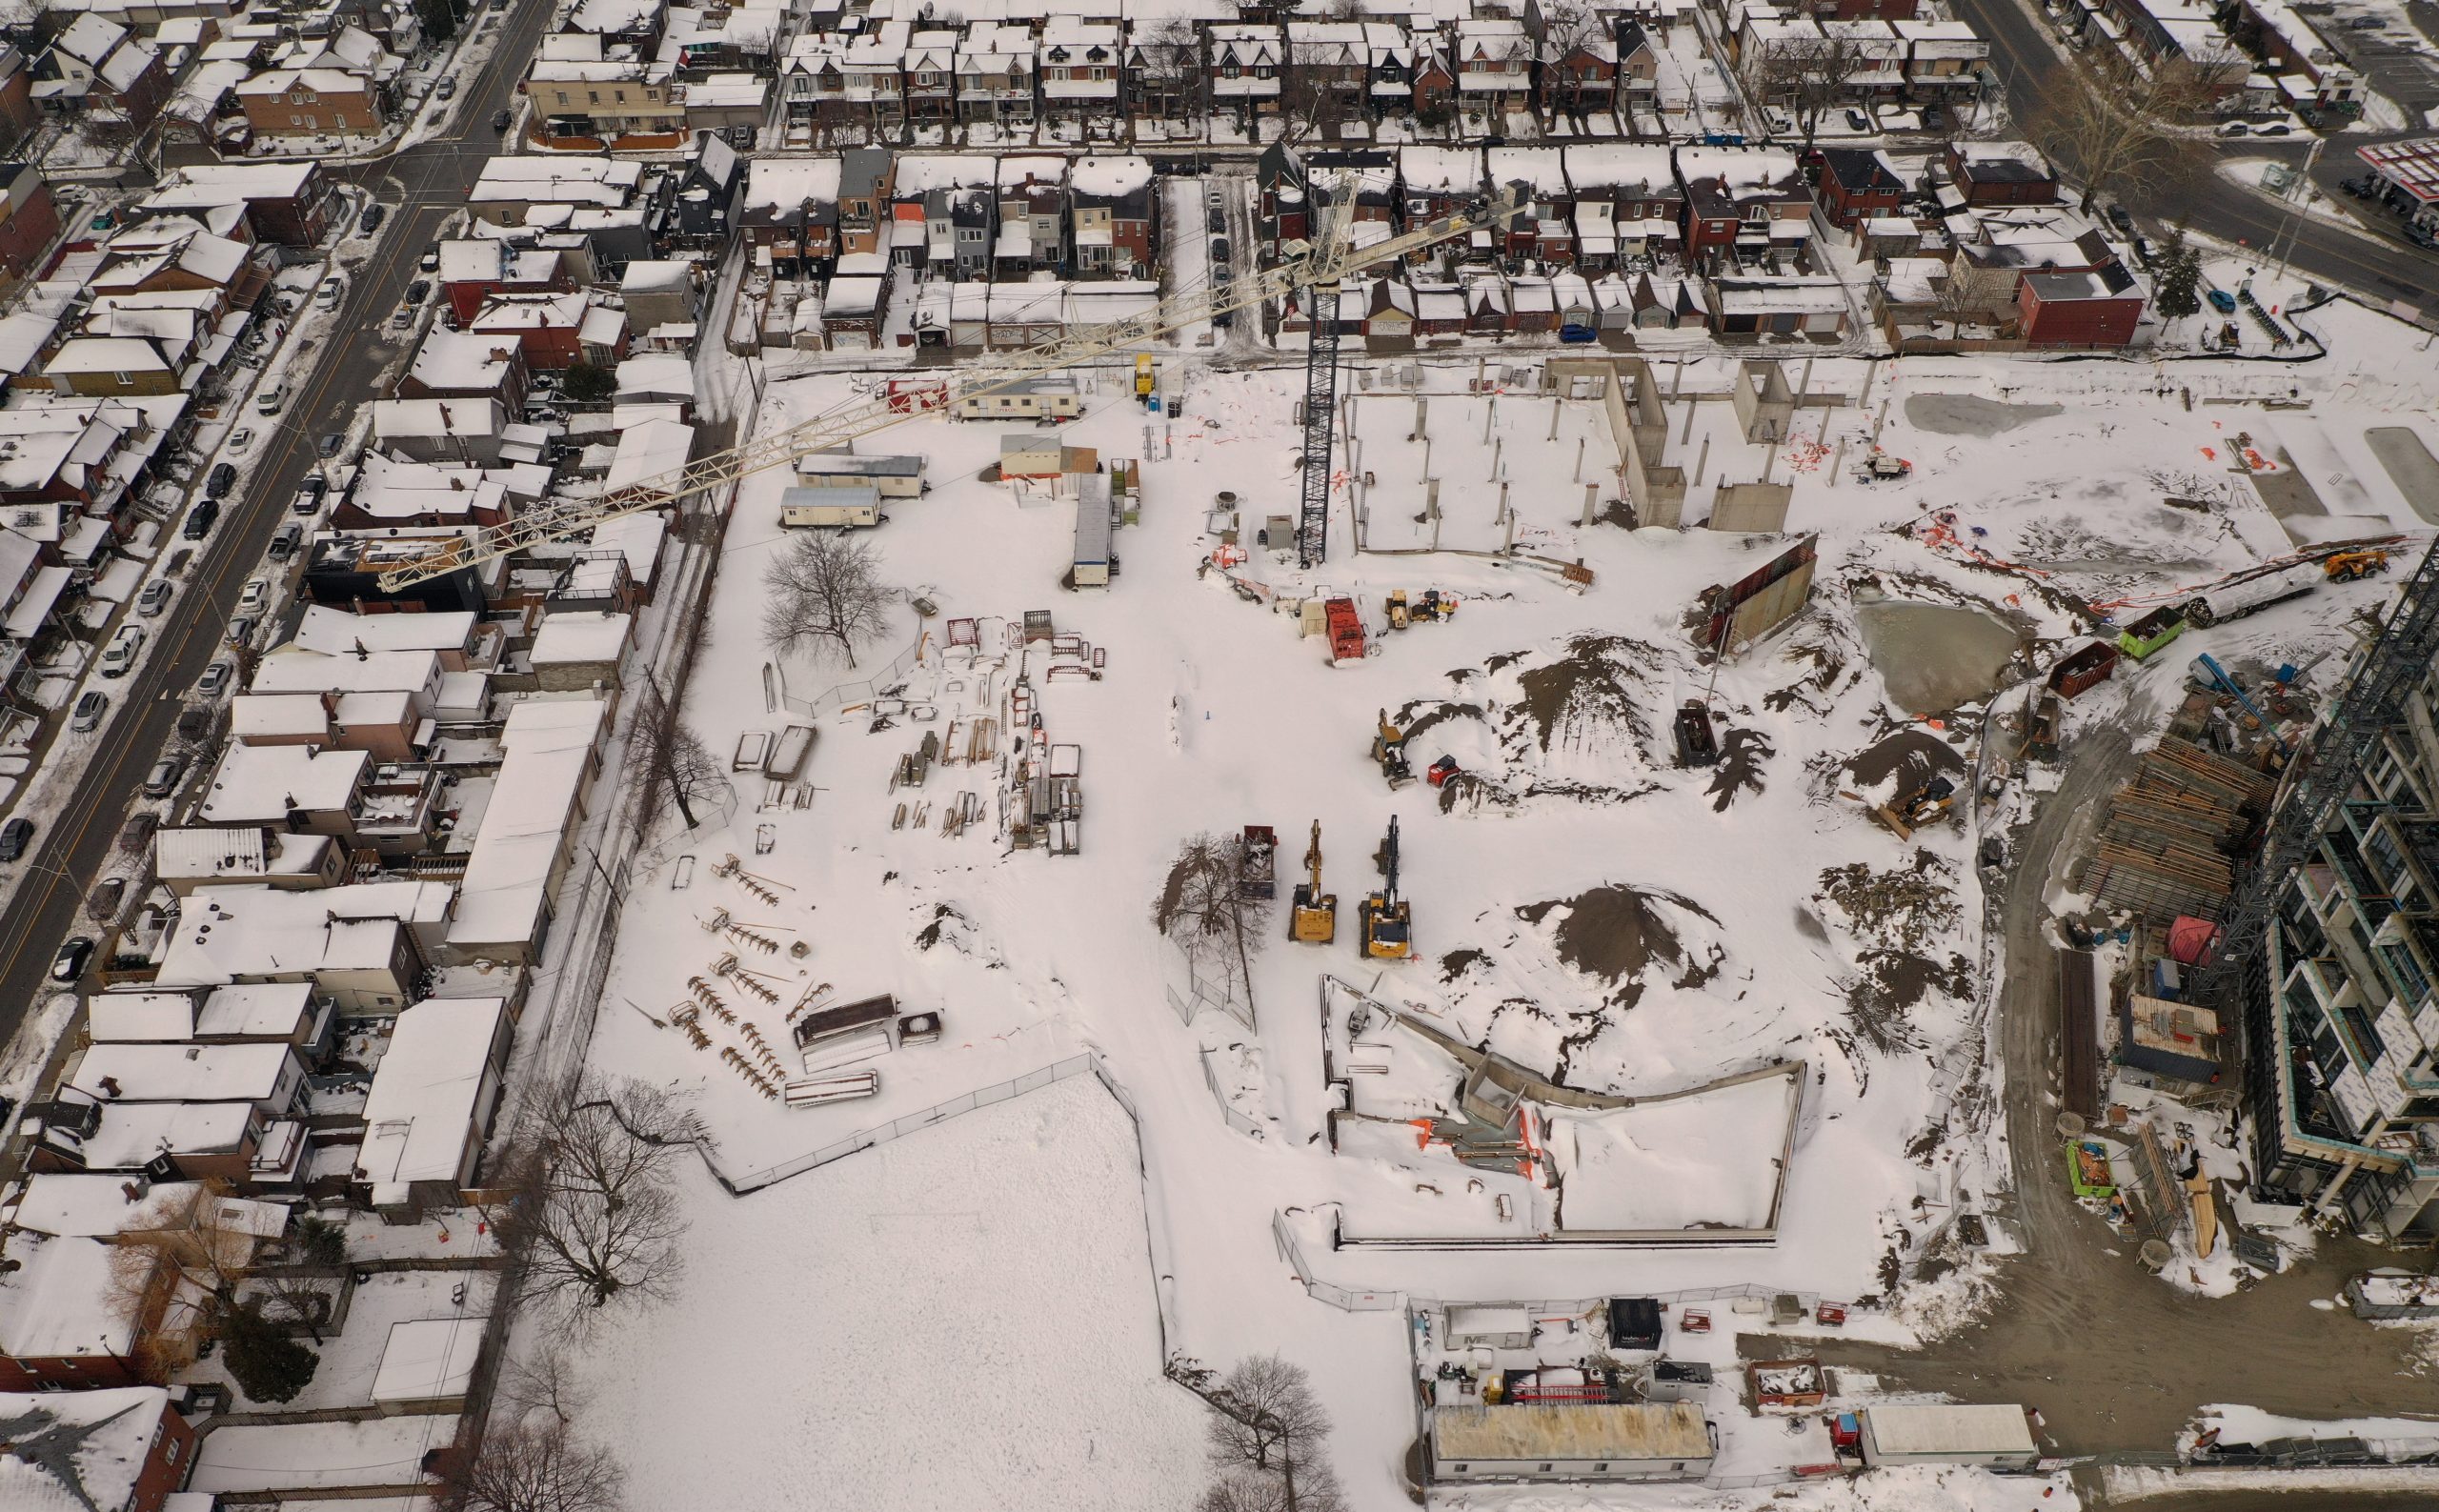 An aerial photograph of the construction site at Wallace Emersion Community Centre on March 4, 2023, which shows a large crane and multiple excavators and construction equipment. A thin layer of snow covers the construction area and surrounding residential homes.